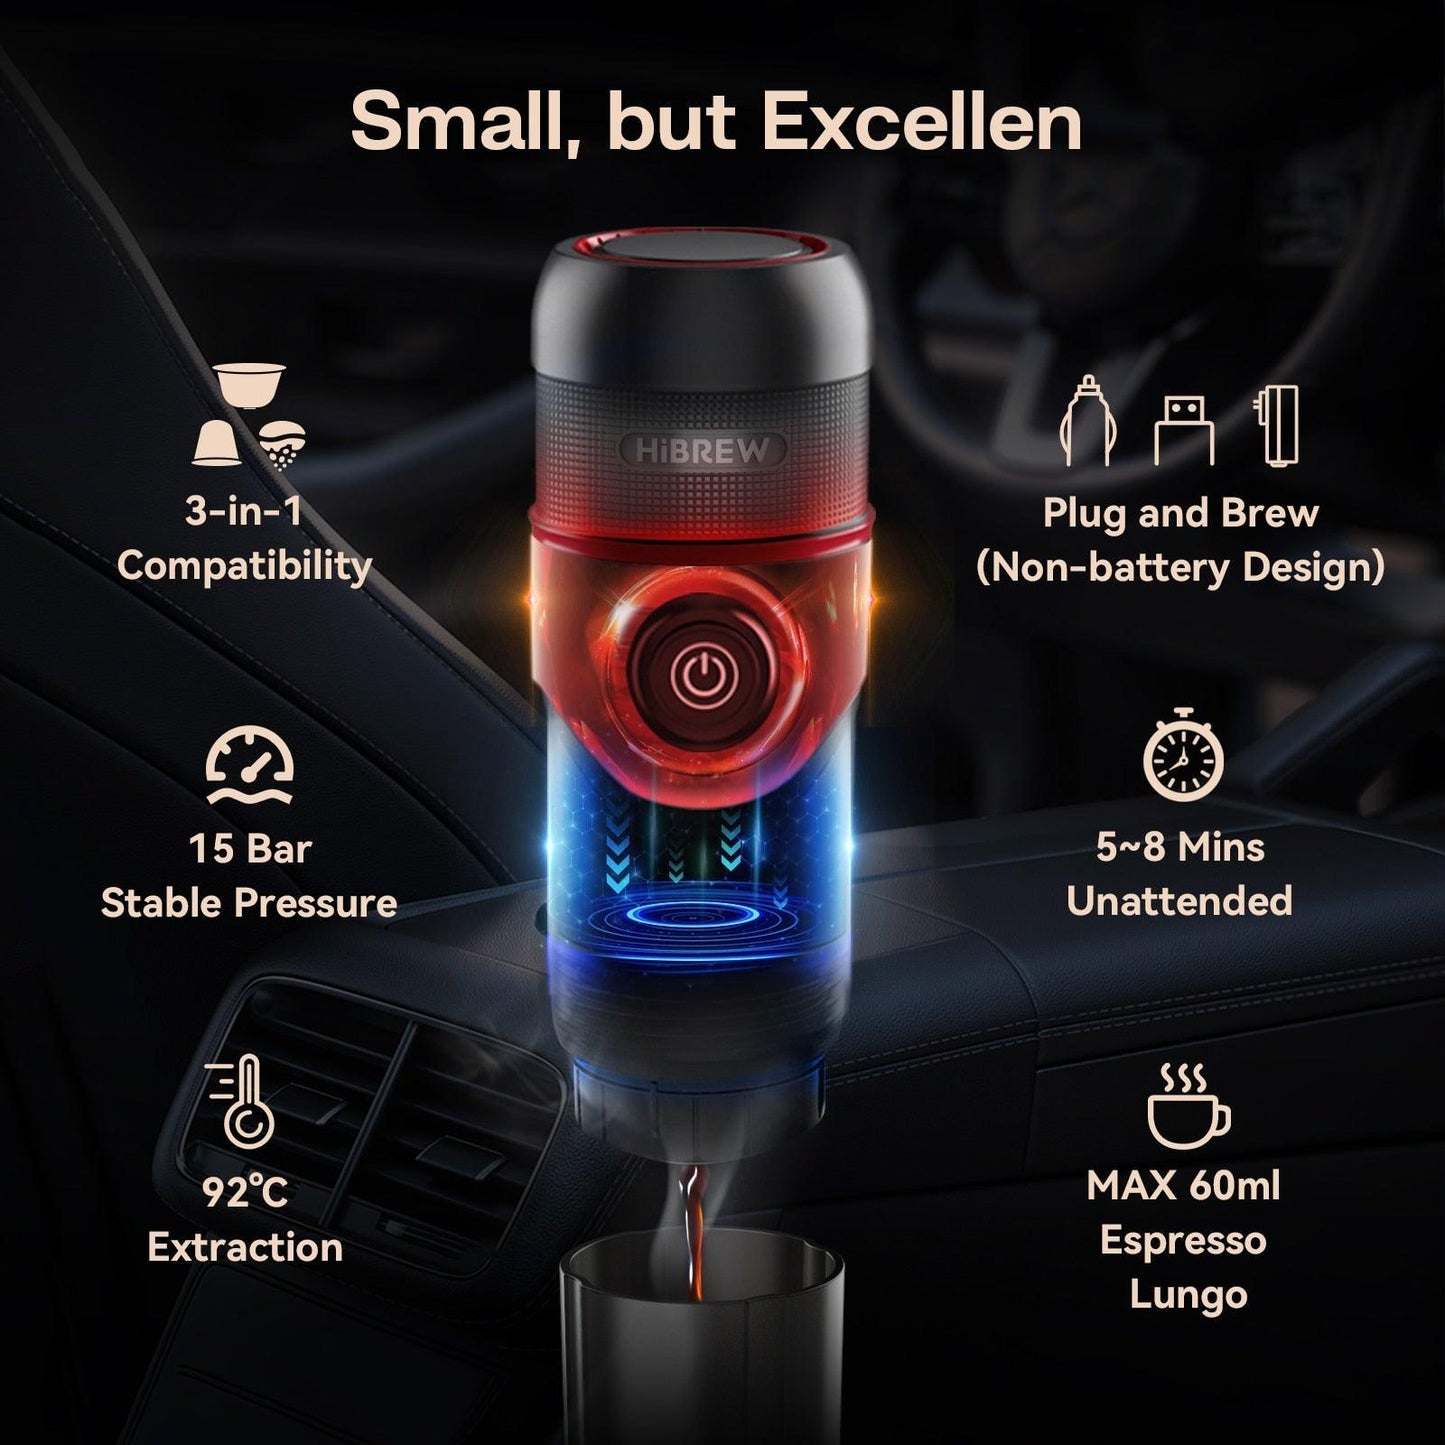 HiBREW Portable Coffee Machine for Car &amp; Home,DC12V Expresso Coffee Maker Fit Nexpresso Dolce Pod Capsule Coffee Powder H4